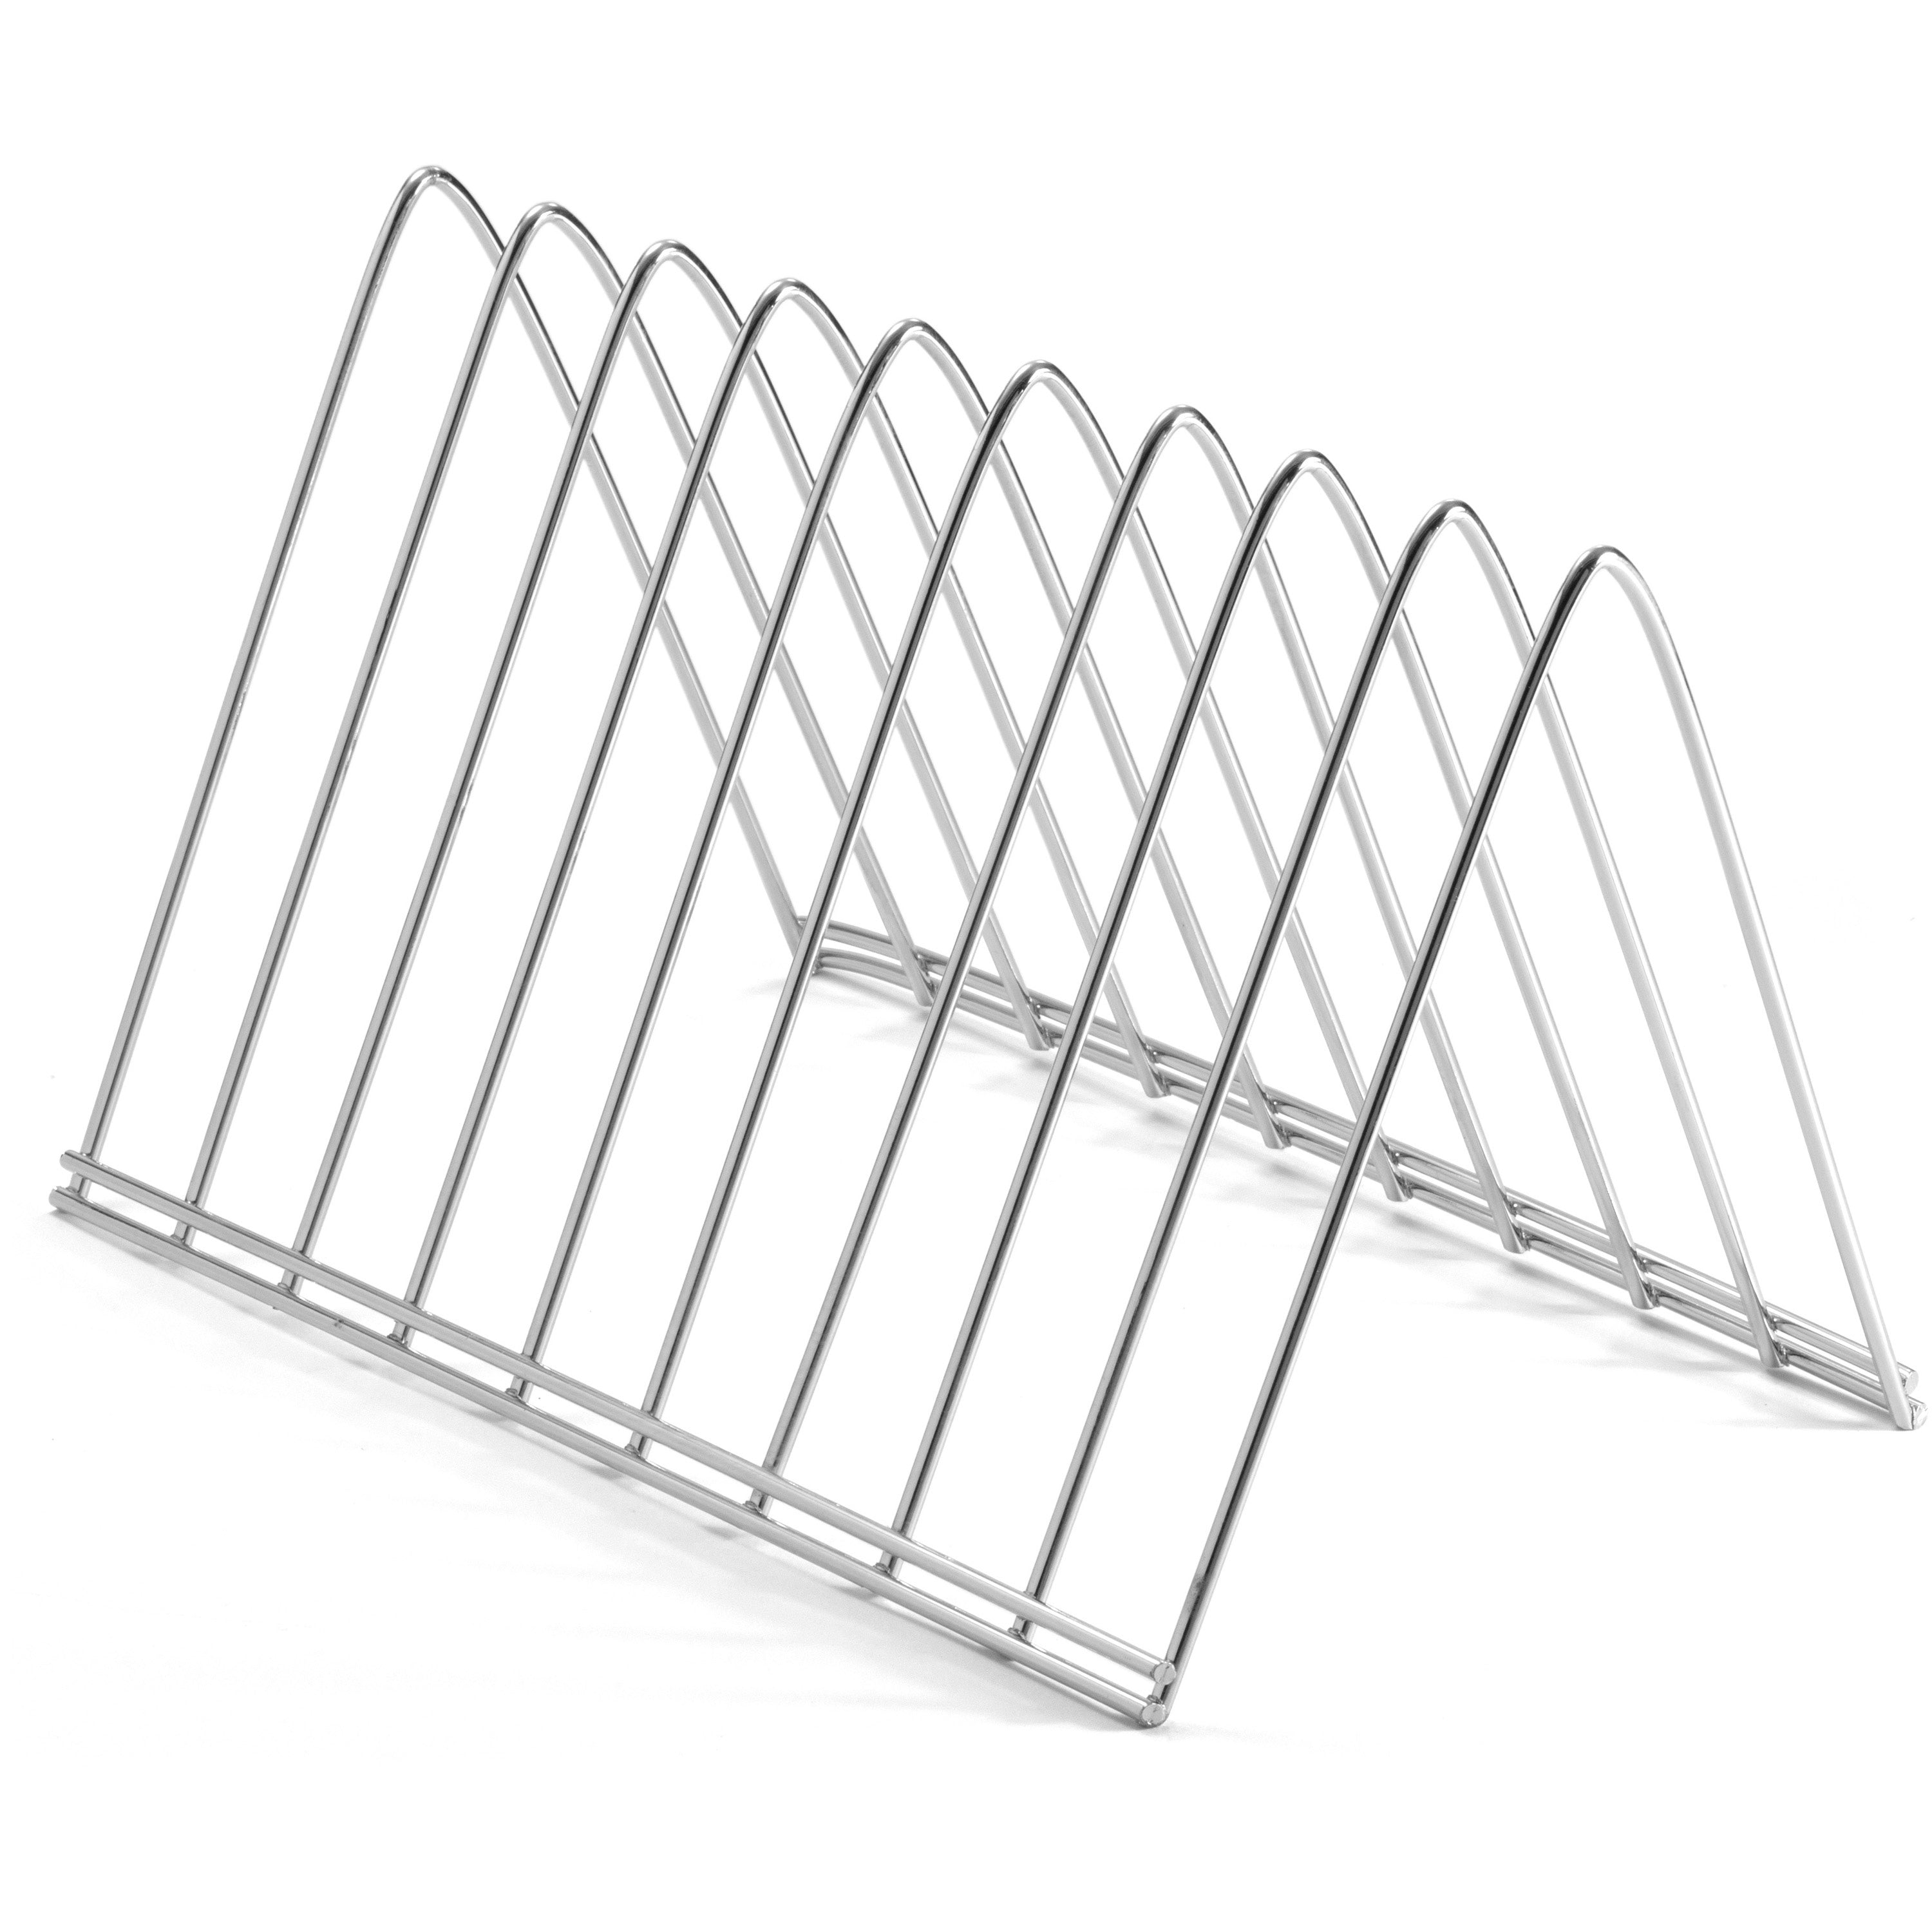 officemate-triangle-wire-sorter-7-height-x-7-width-x-11-depthdesktop-sturdy-chrome-steel-wire-1-each_oic93152 - 1